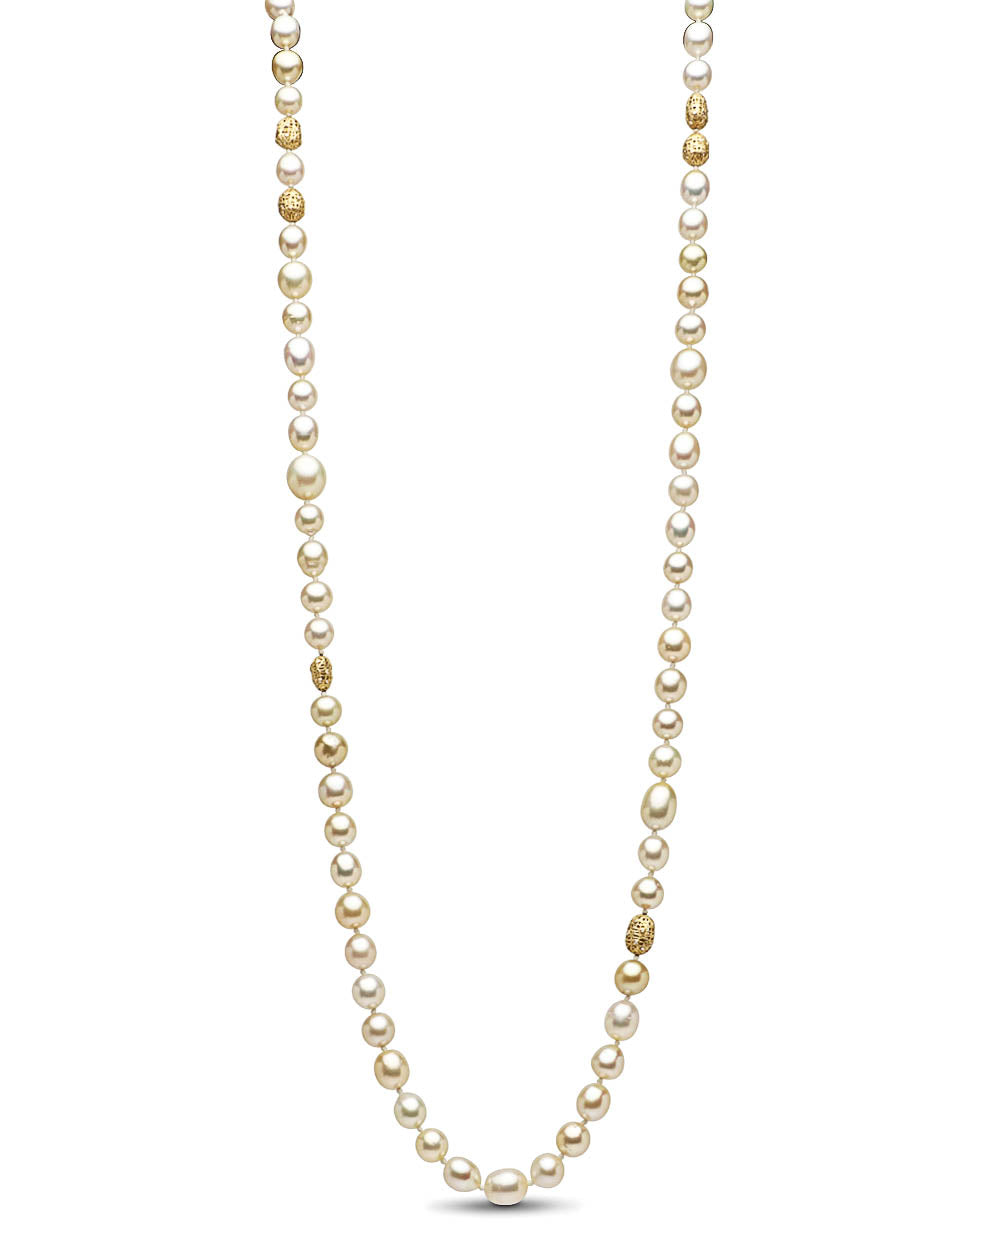 Lace South Sea Pearl Beaded Wrap Necklace